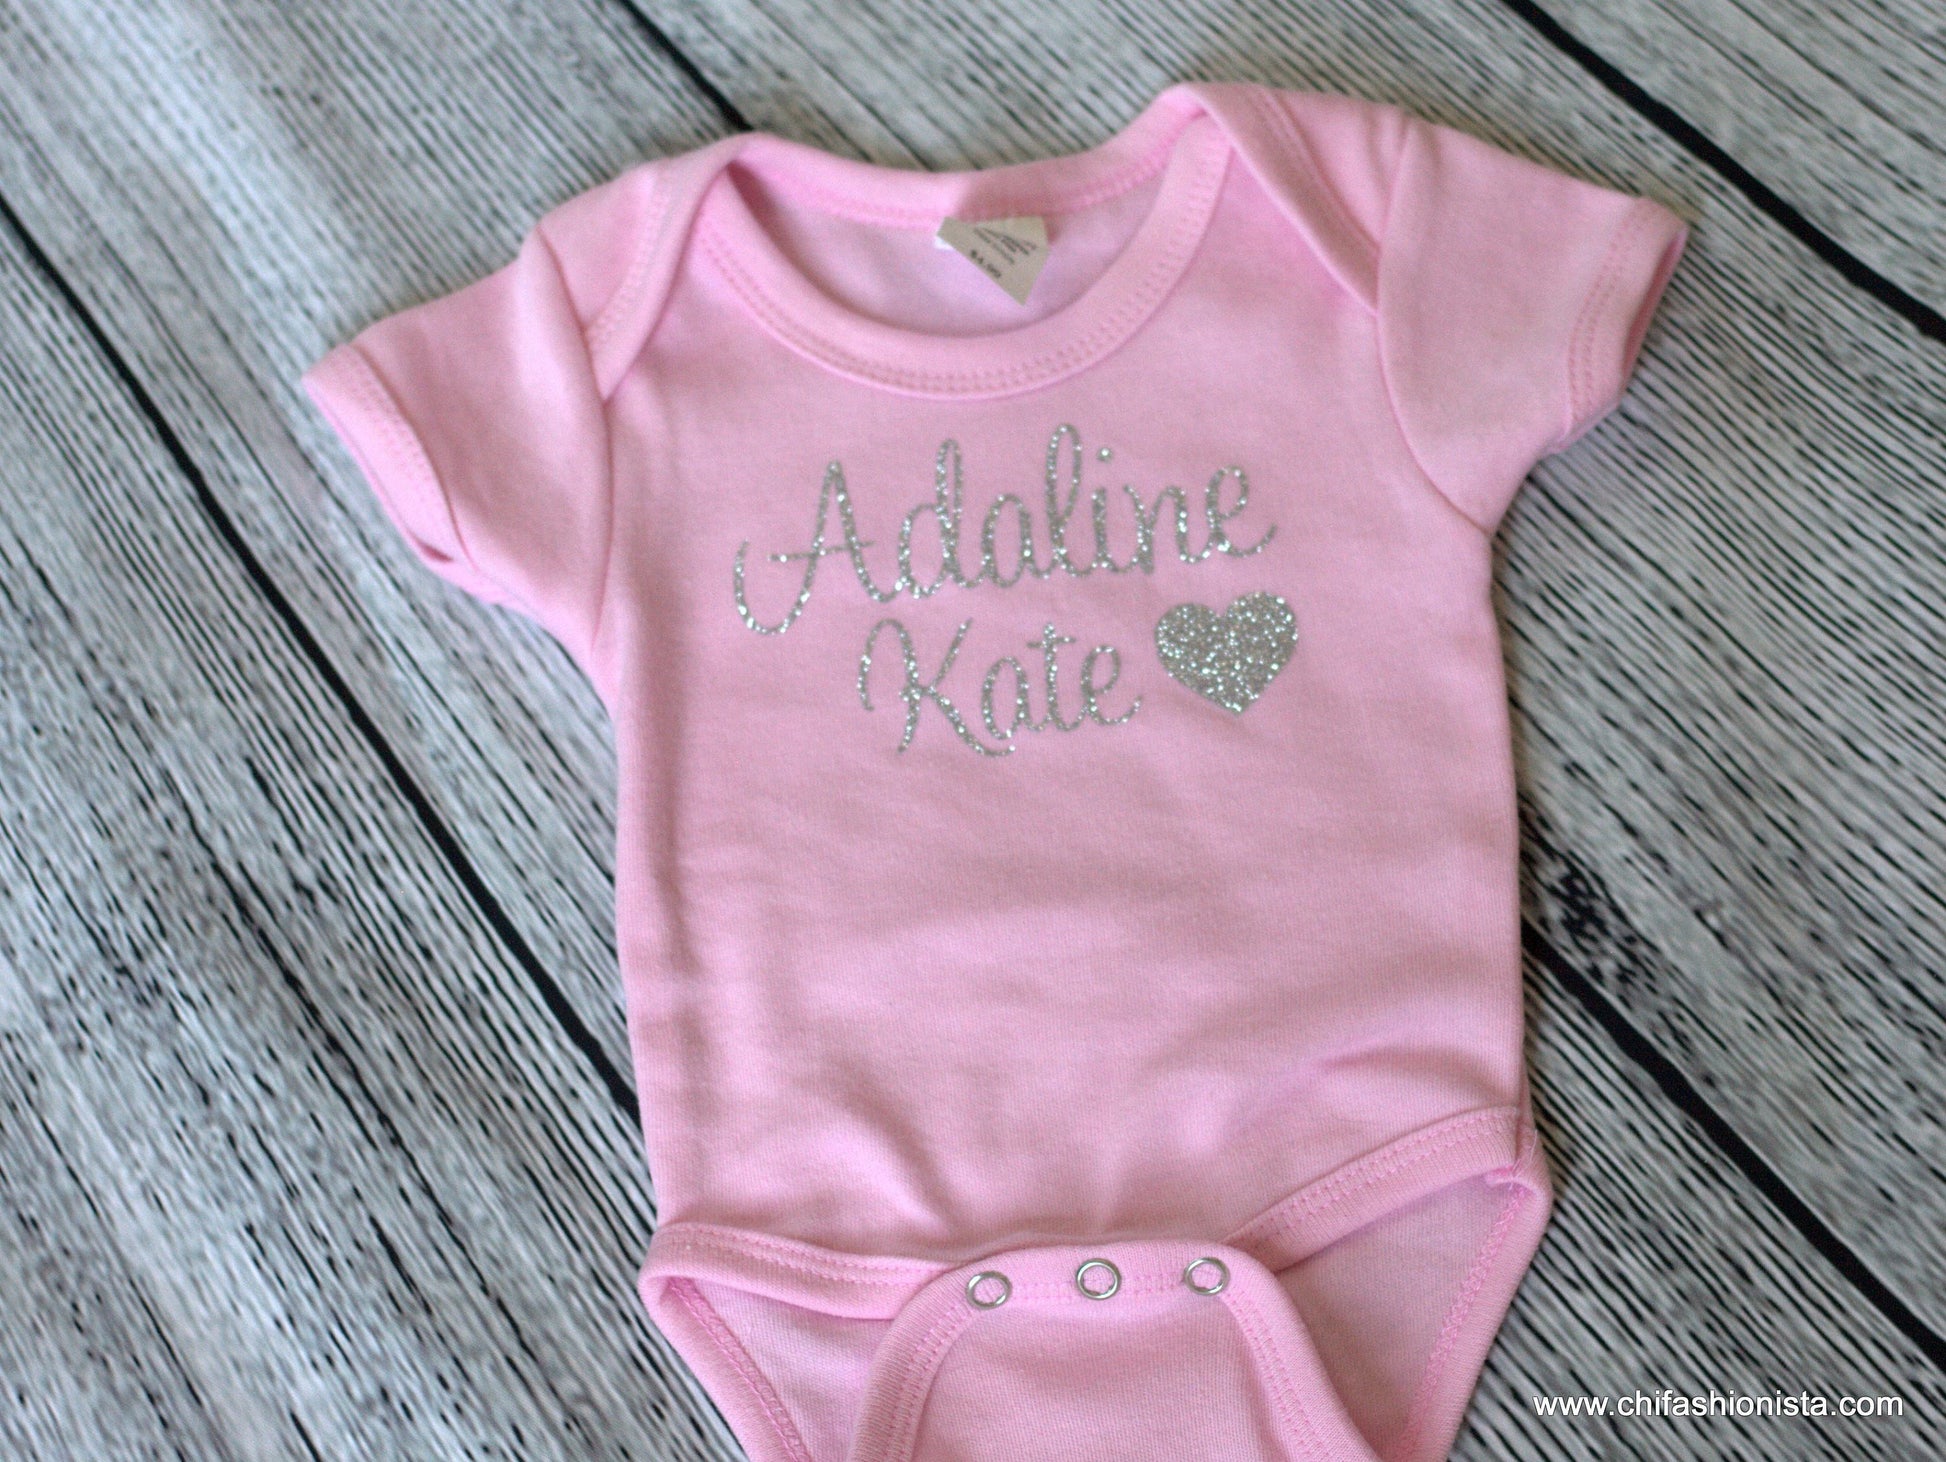 Handcrafted Children's Clothing, Clothing for Children and Parents, Birth Announcement Shirt, chi-fashionista